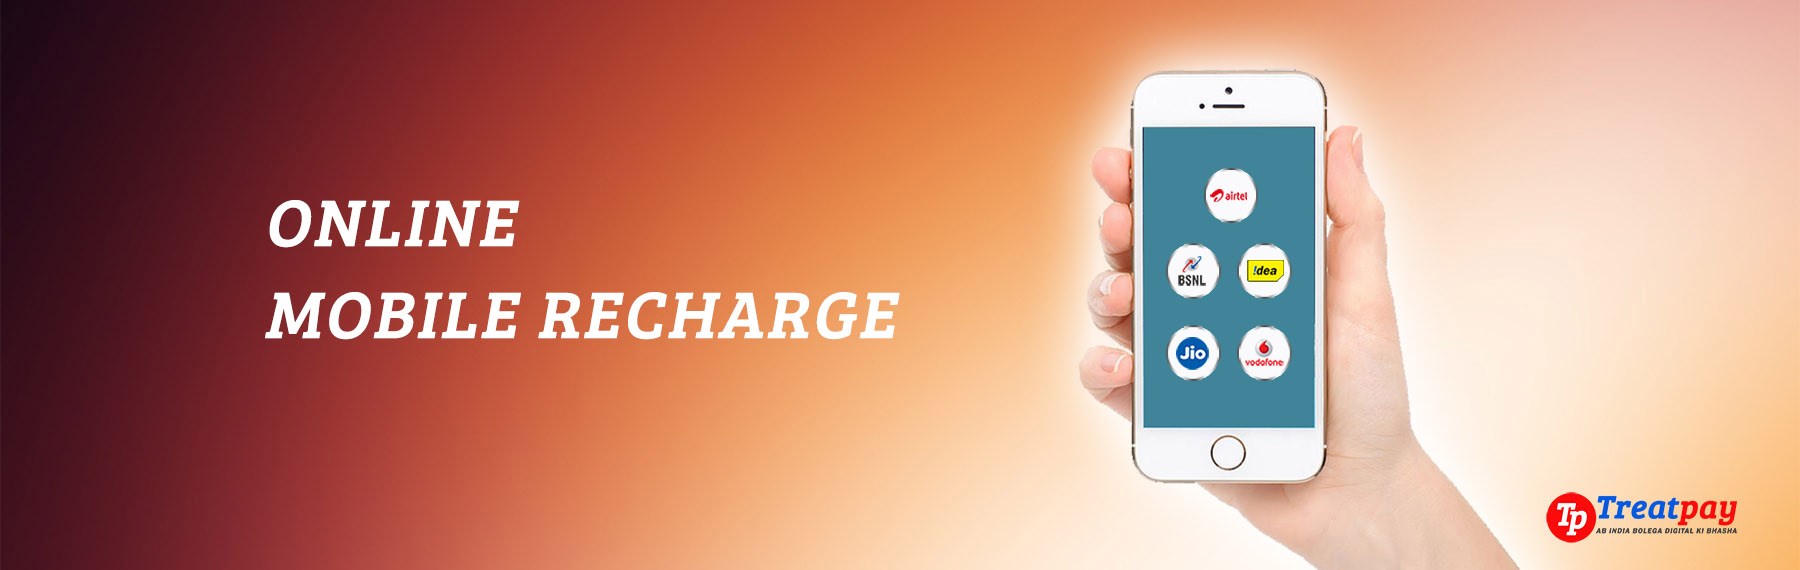 Mobile Recharge